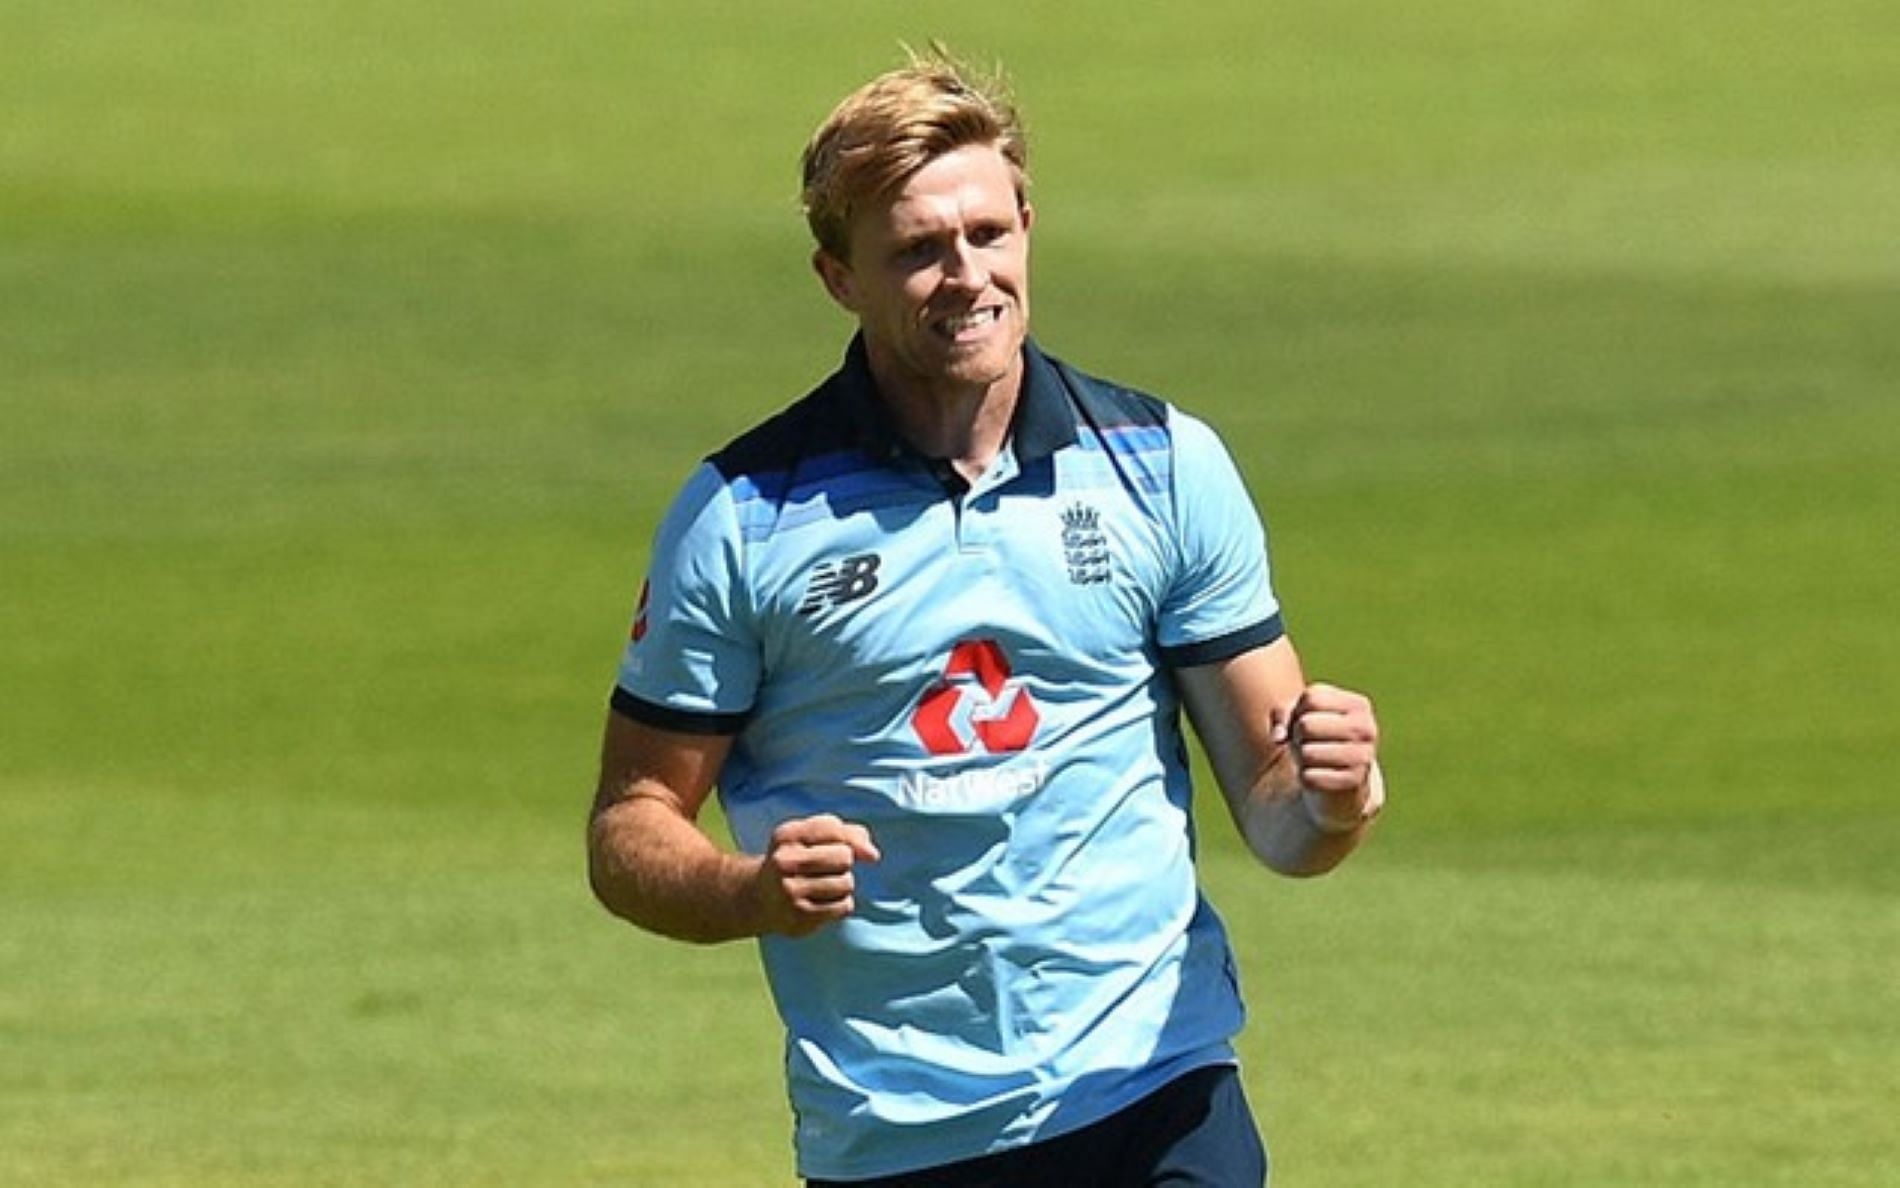 Willey missed out on the 2019 World Cup squad in the 11th hour.